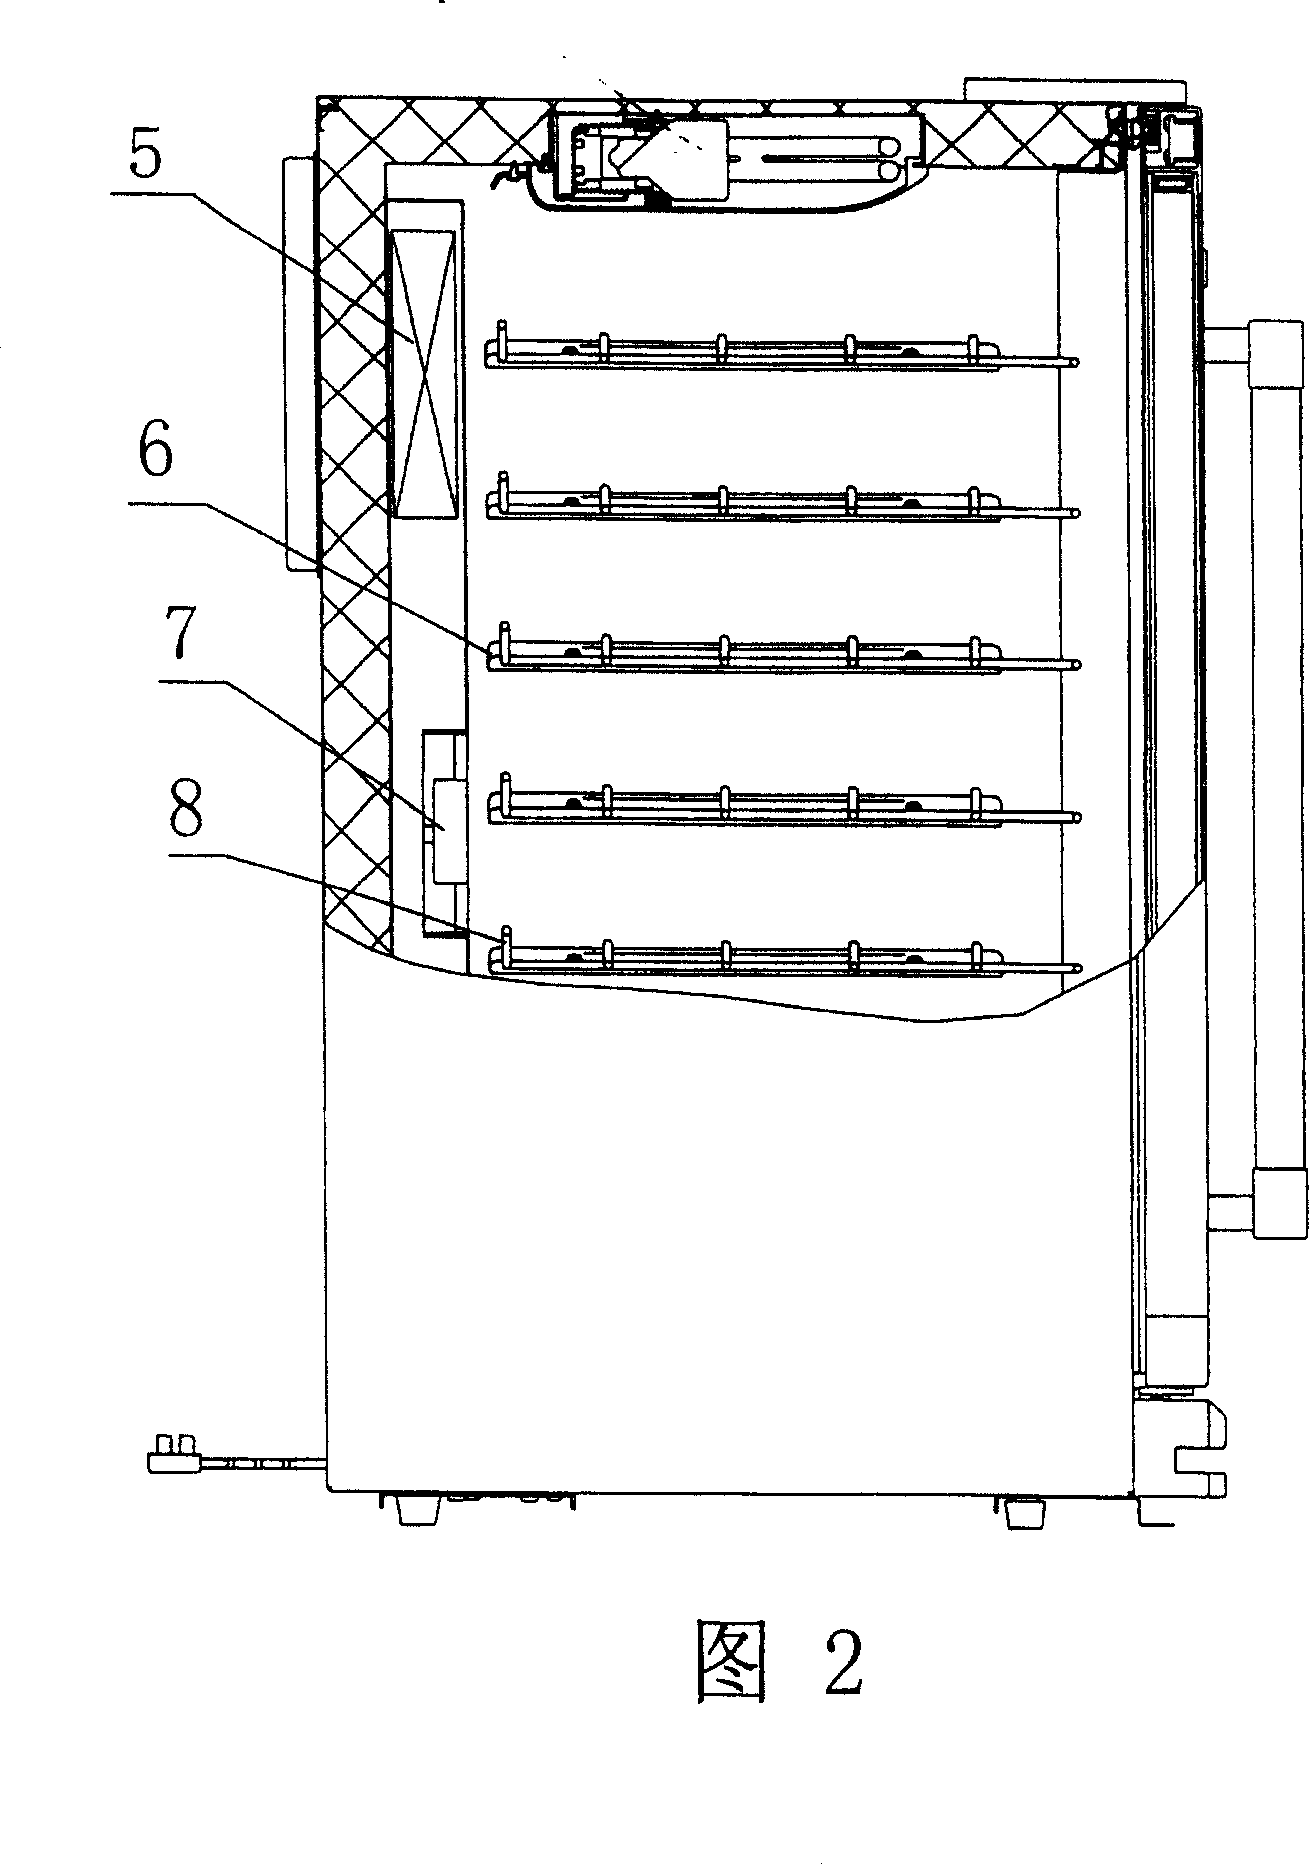 Double temperature double control wine cabinet and method for enhancing accuracy of temperature control